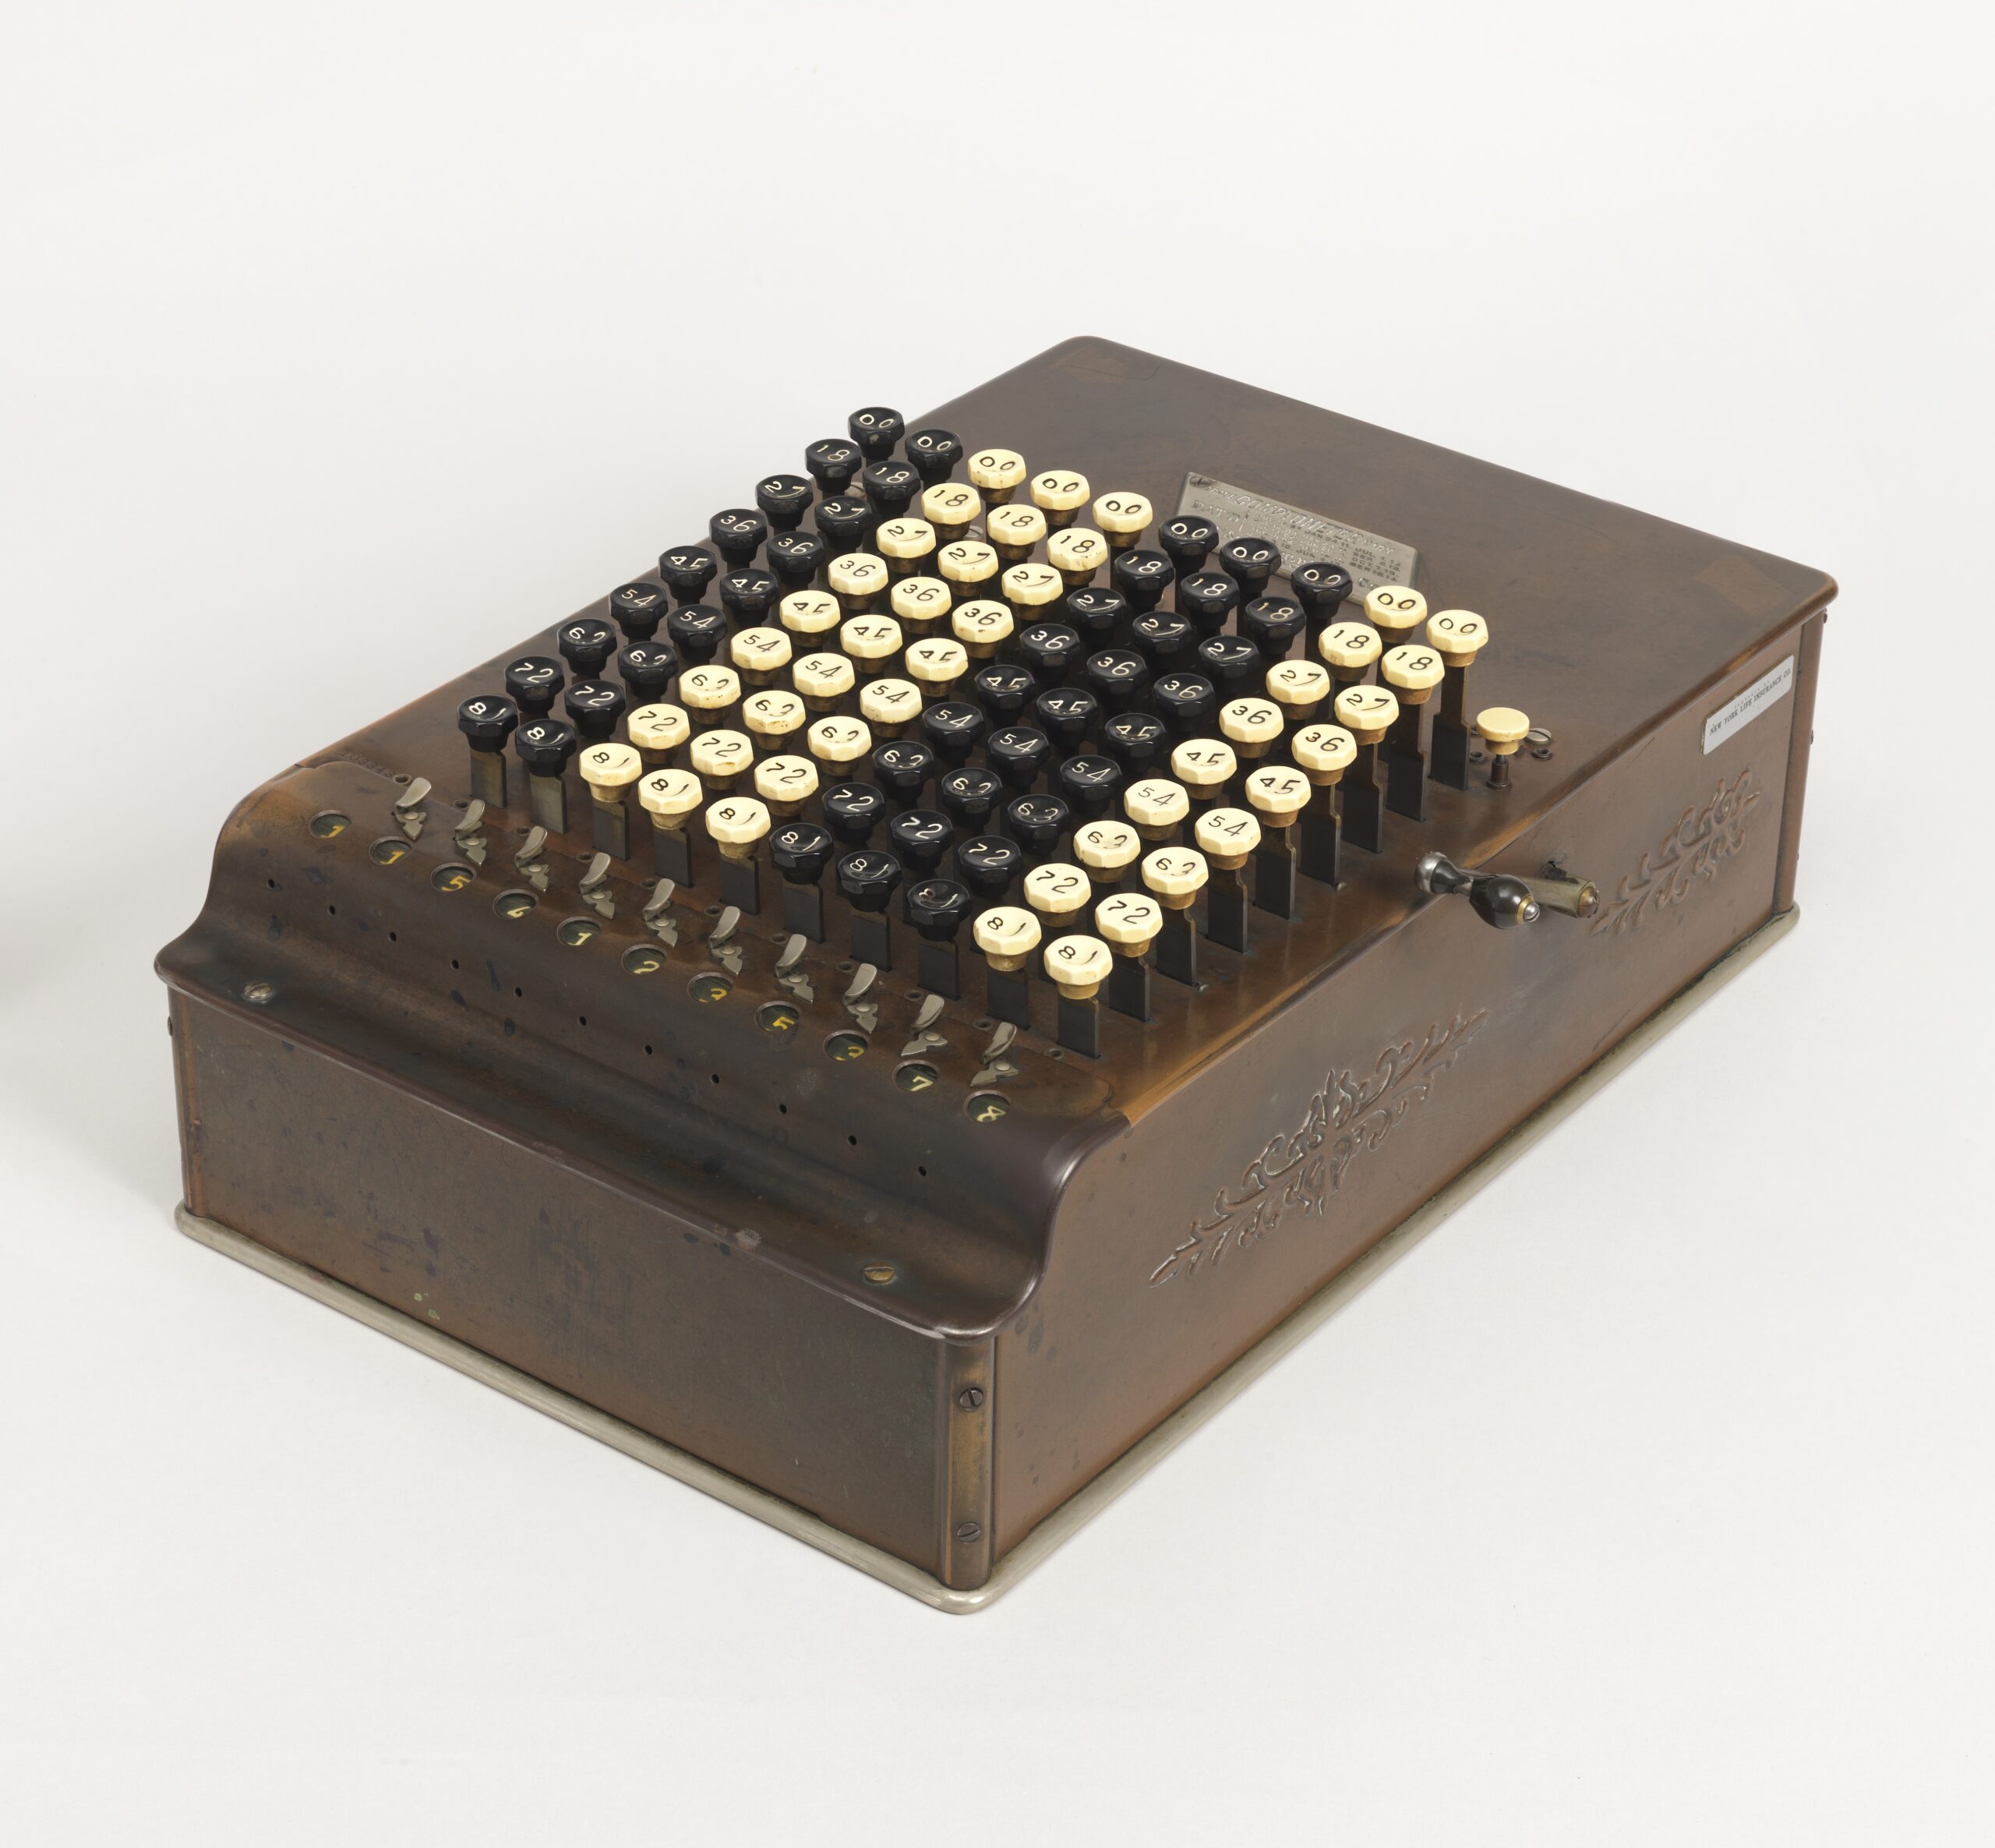 A Comptometer dating to around 1887.